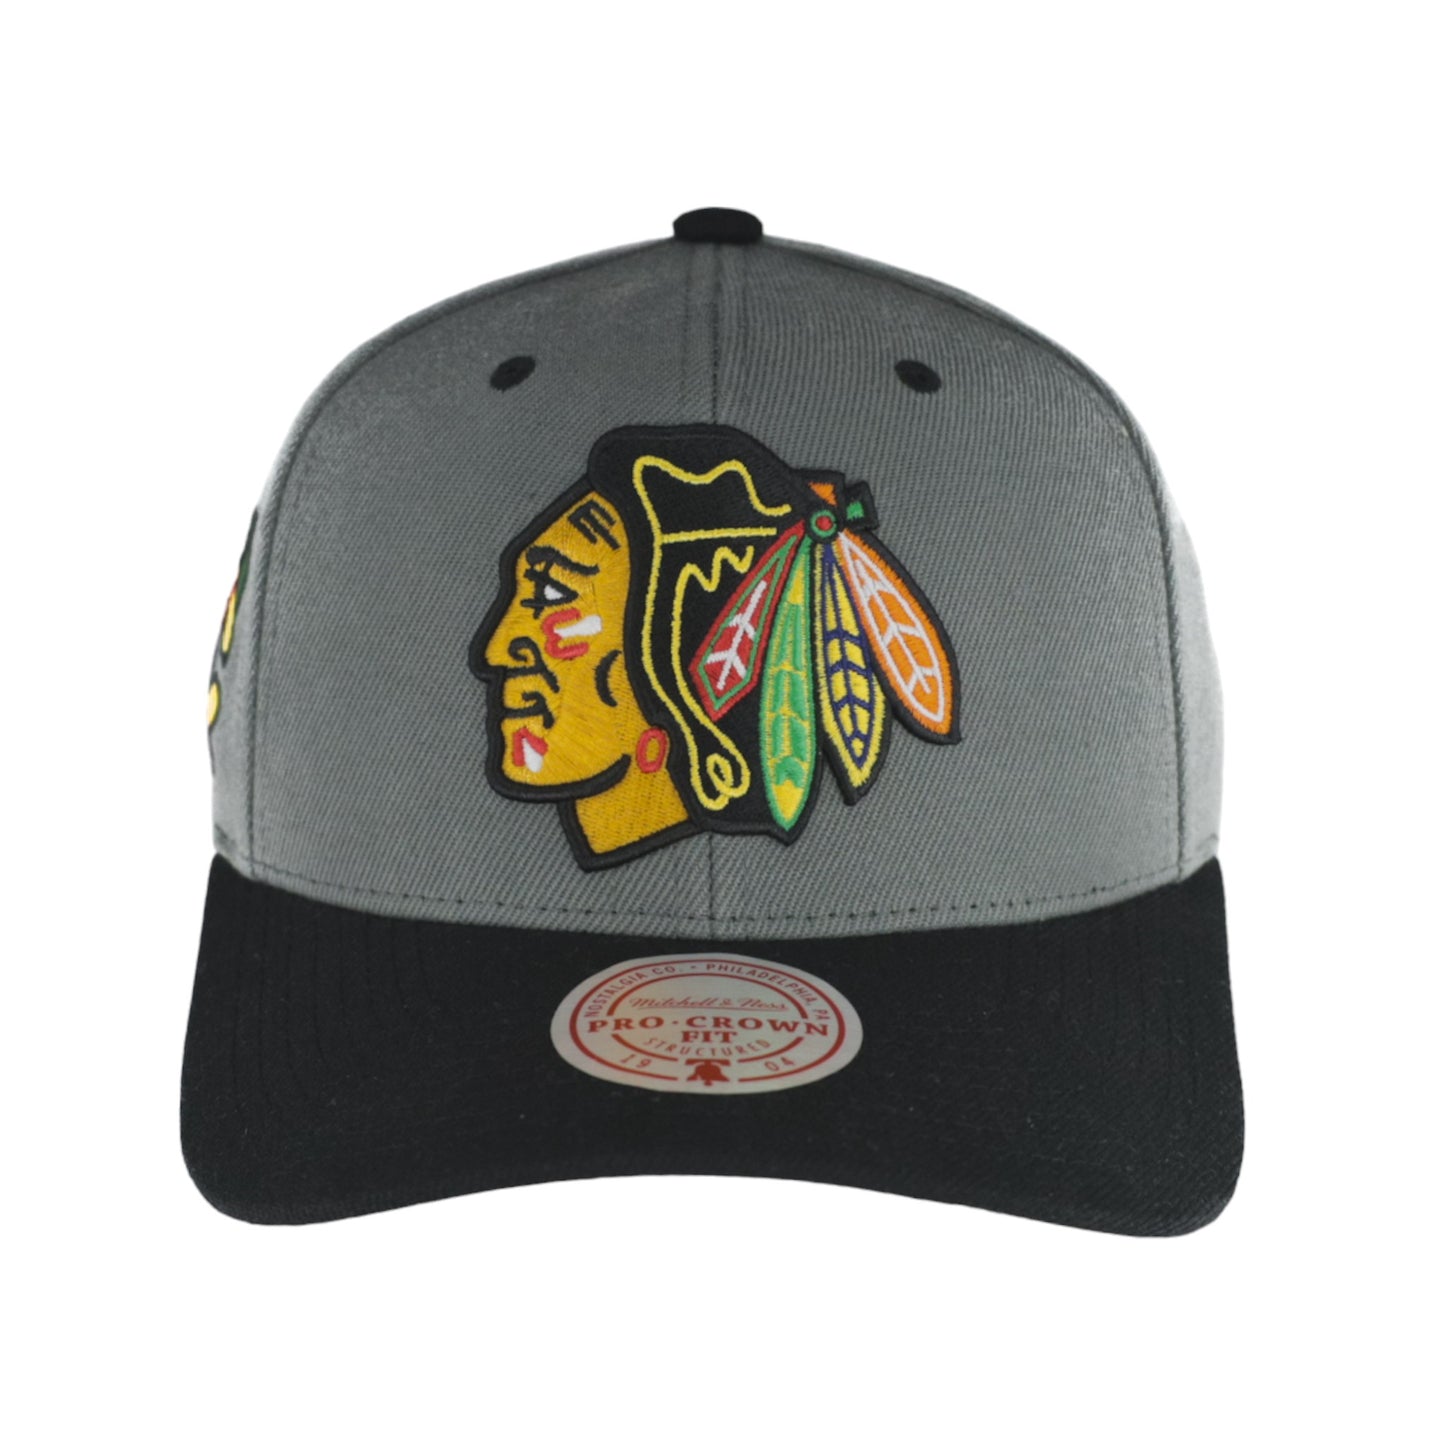 Chicago Blackhawks Charcoal Pro Crown Structured Mitchell & Ness Snapback Hat